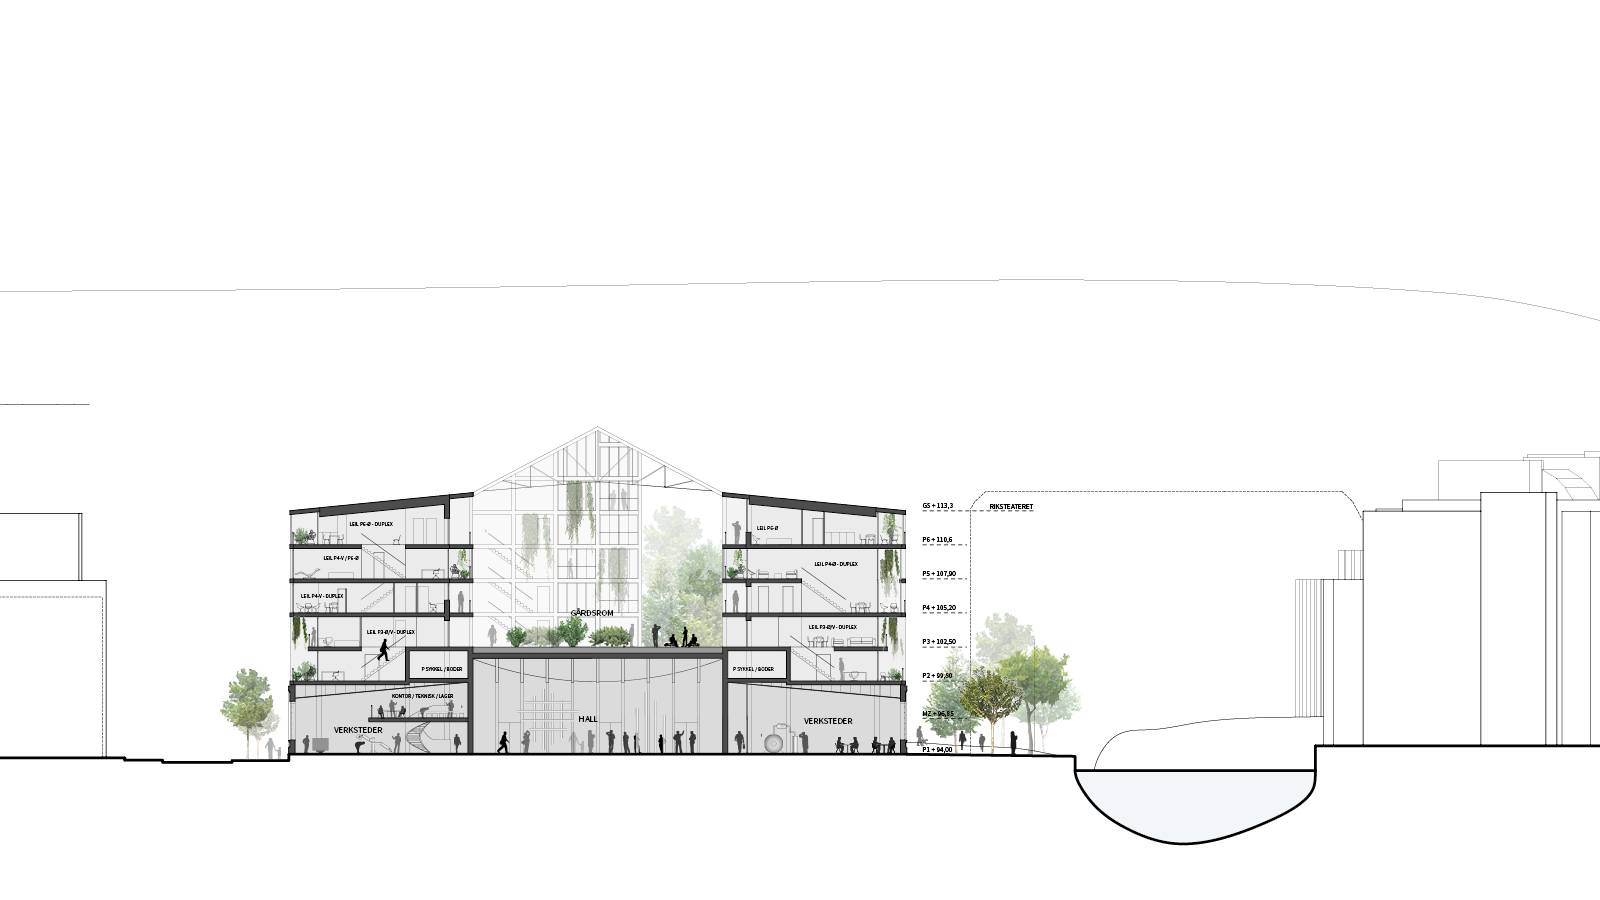 CROSS SECTION THROUGH RIVER - Nydalsveien 32B – “Huset” - SPOL Architects